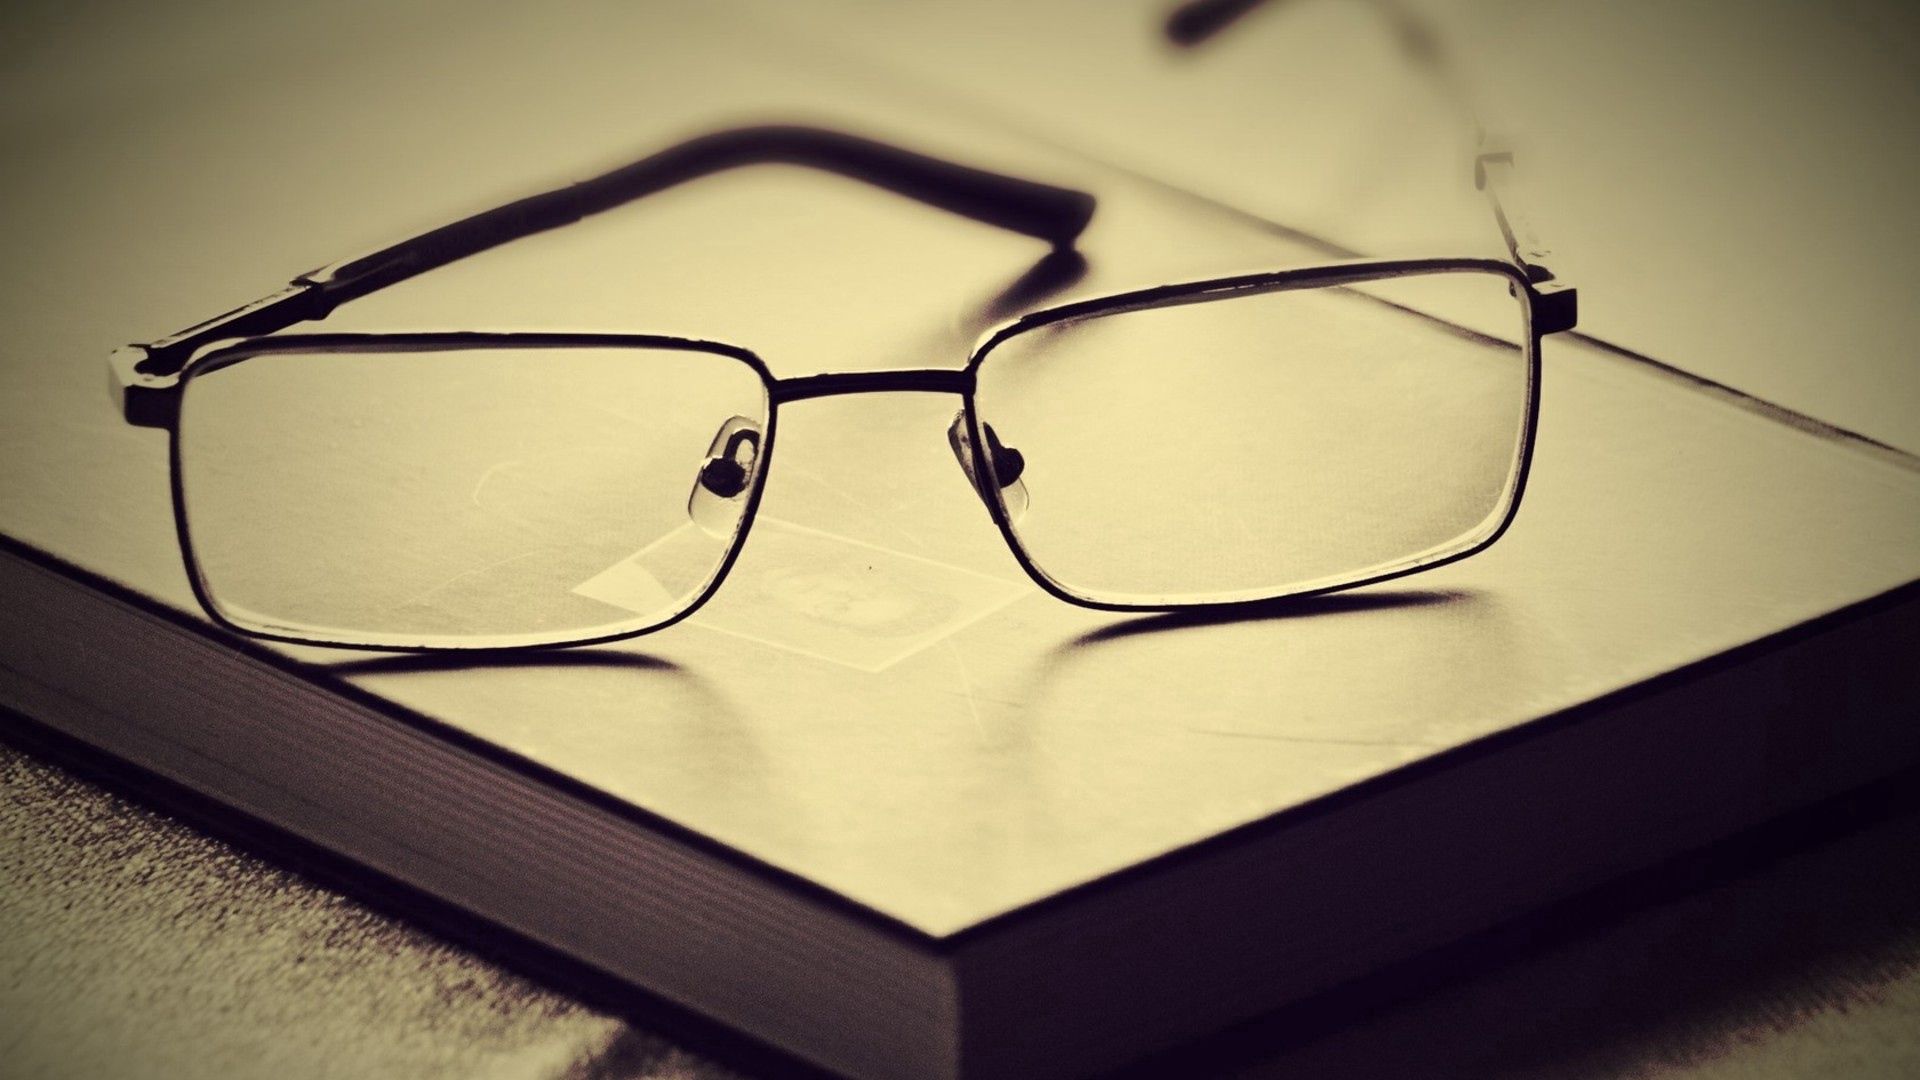 android miscellanea, miscellaneous, book, lenses, glasses, spectacles, frame, setting